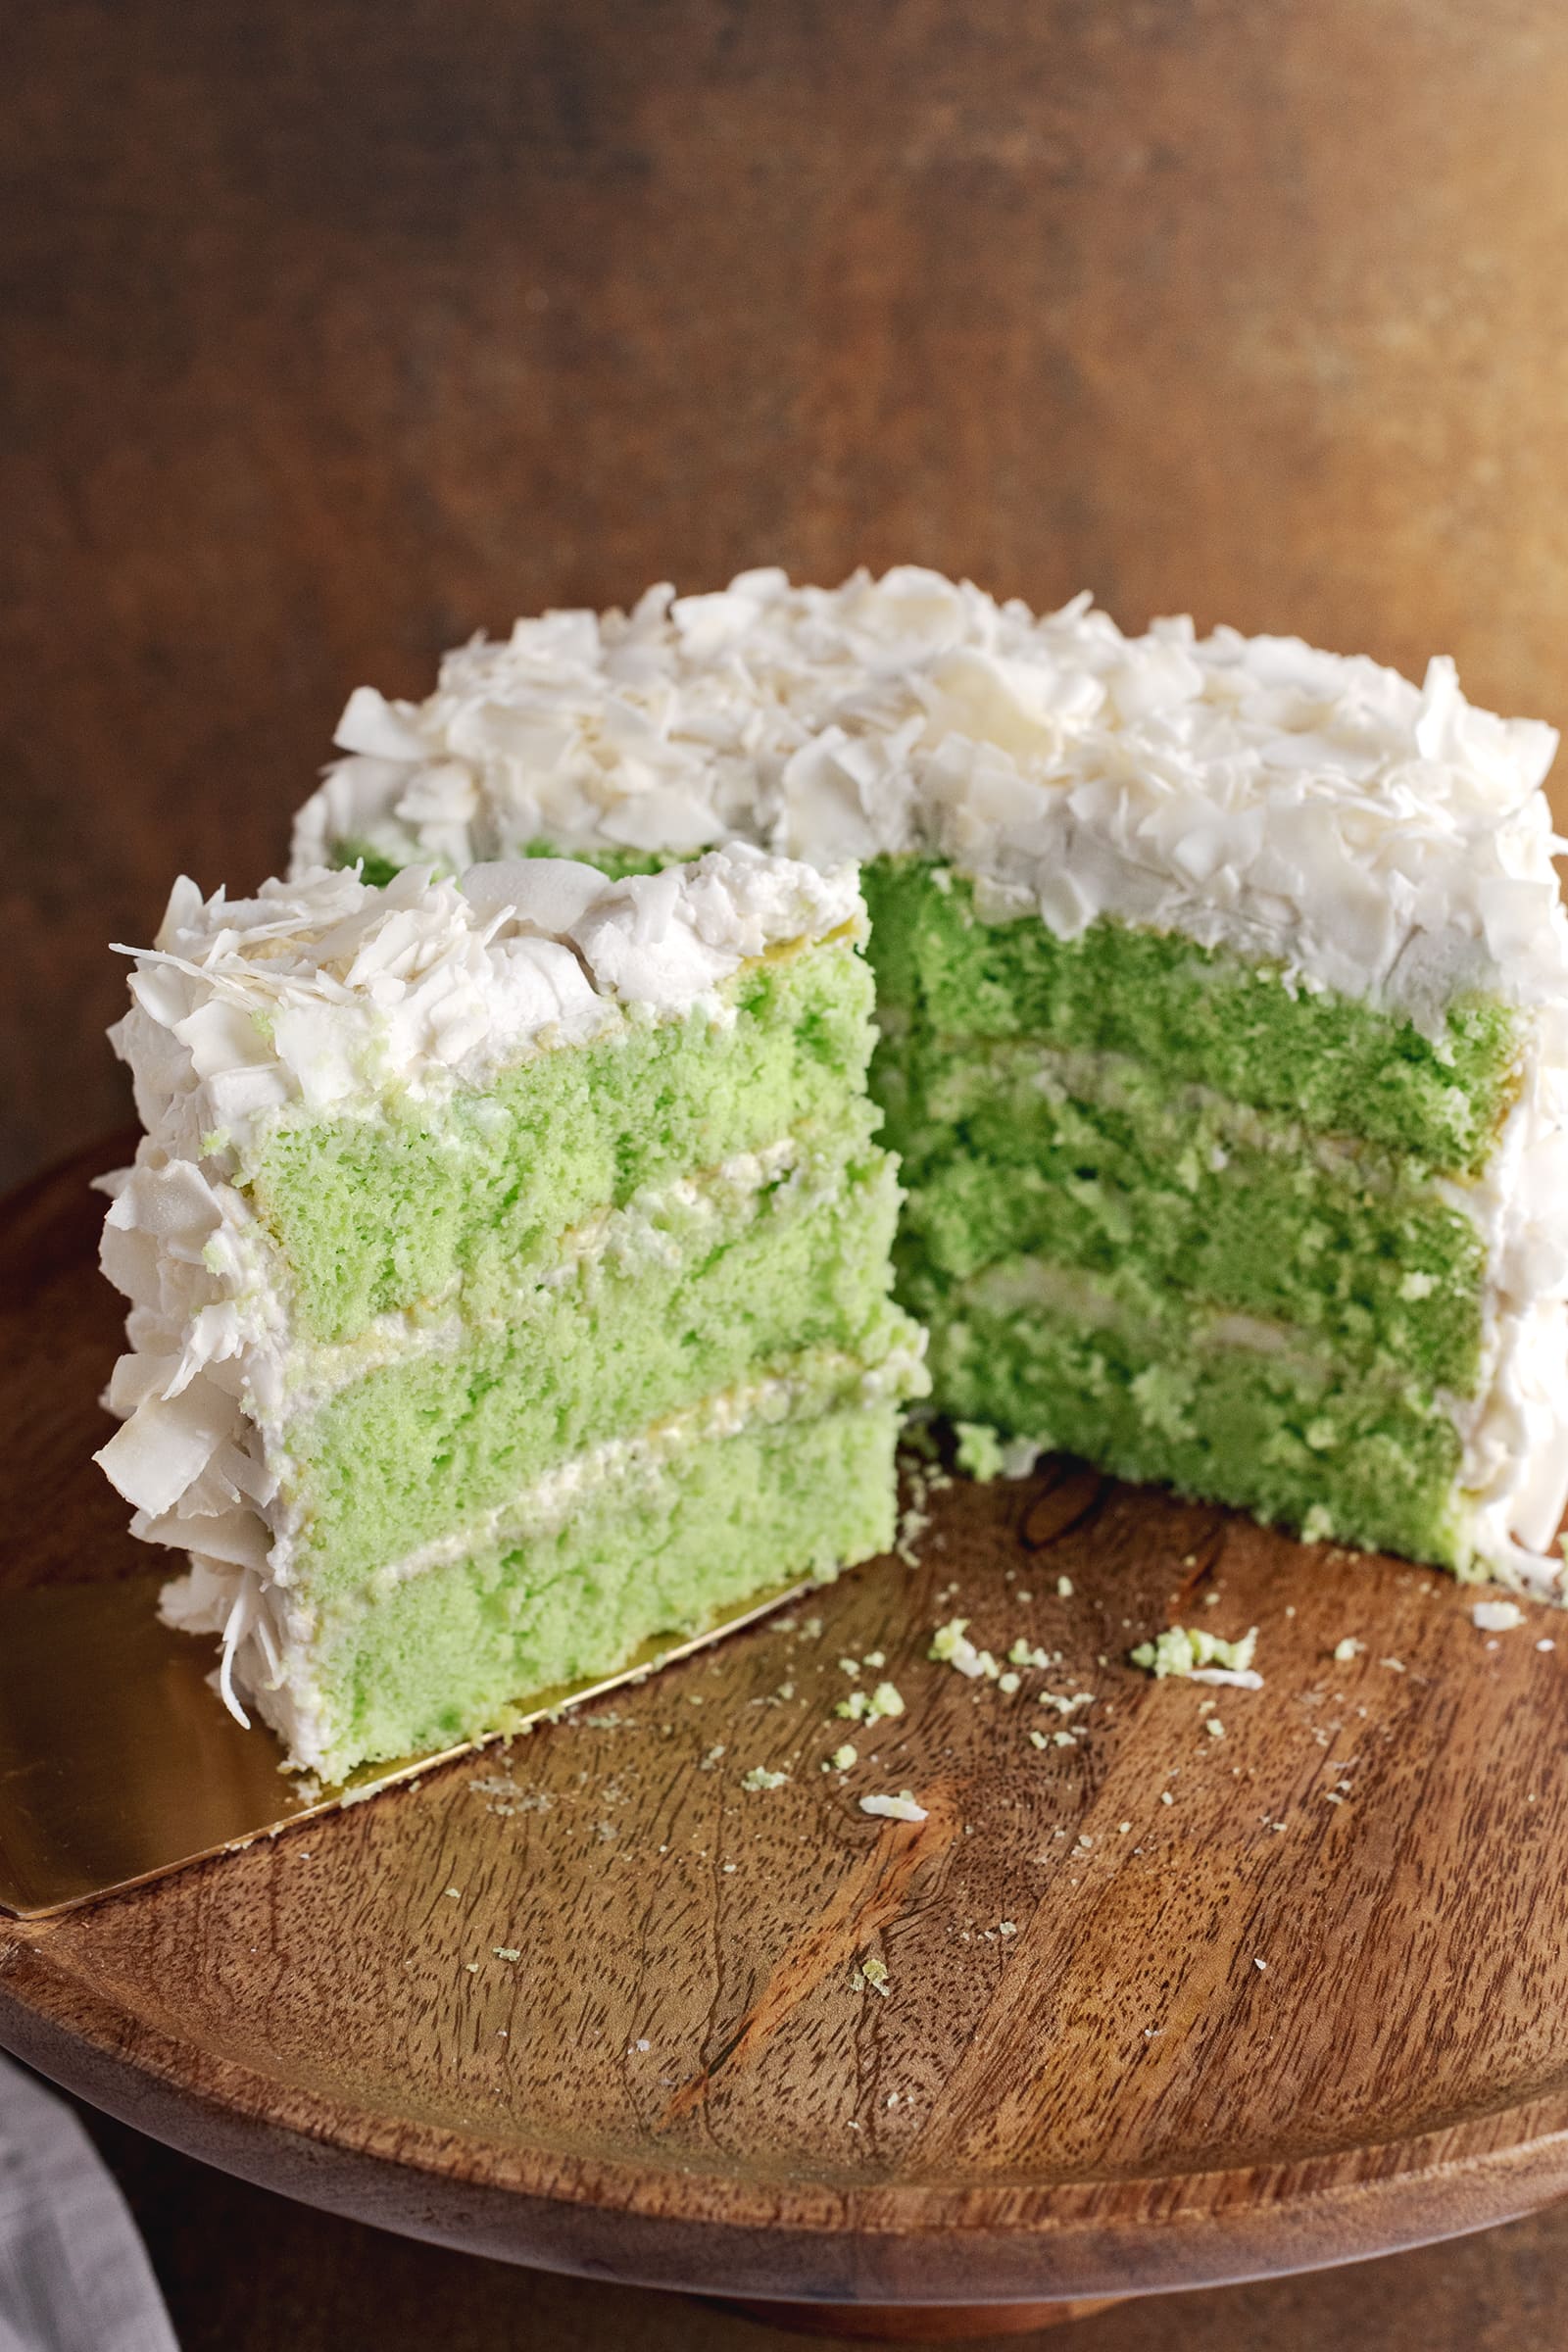 A slice of pandan coconut cake in front of half of a cake in the background.